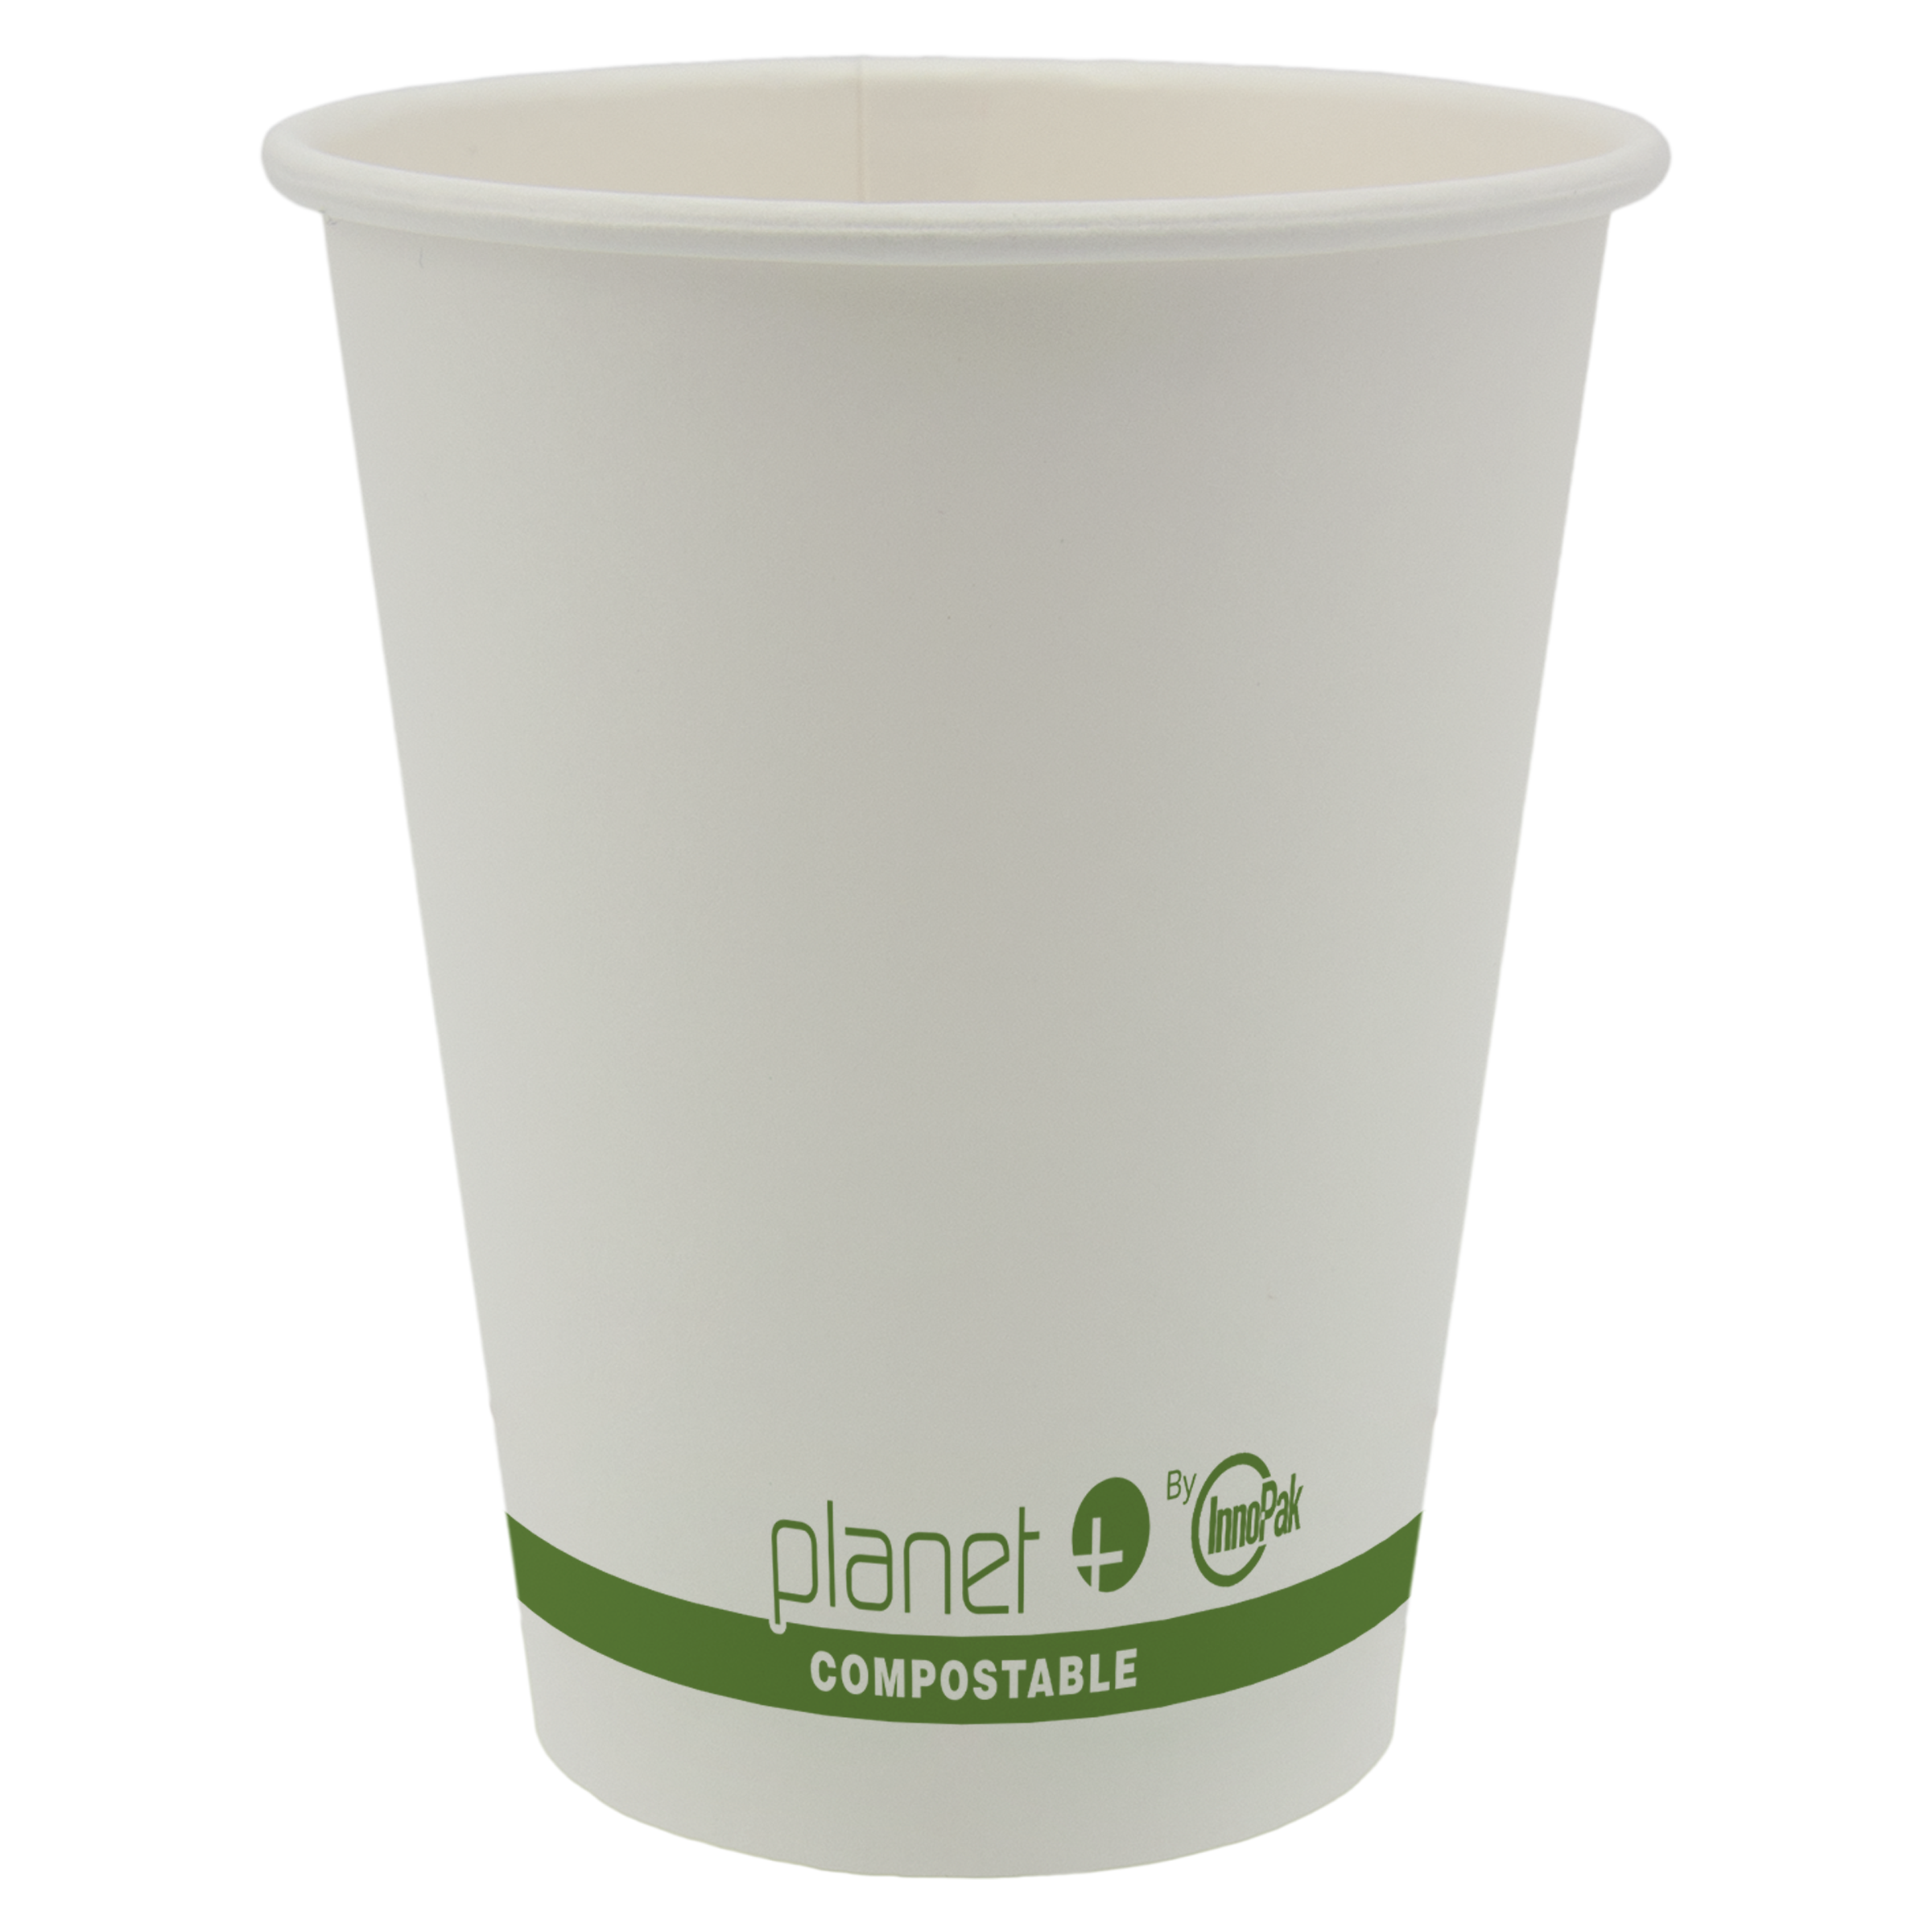 12 oz White Compostable Paper Coffee Cup